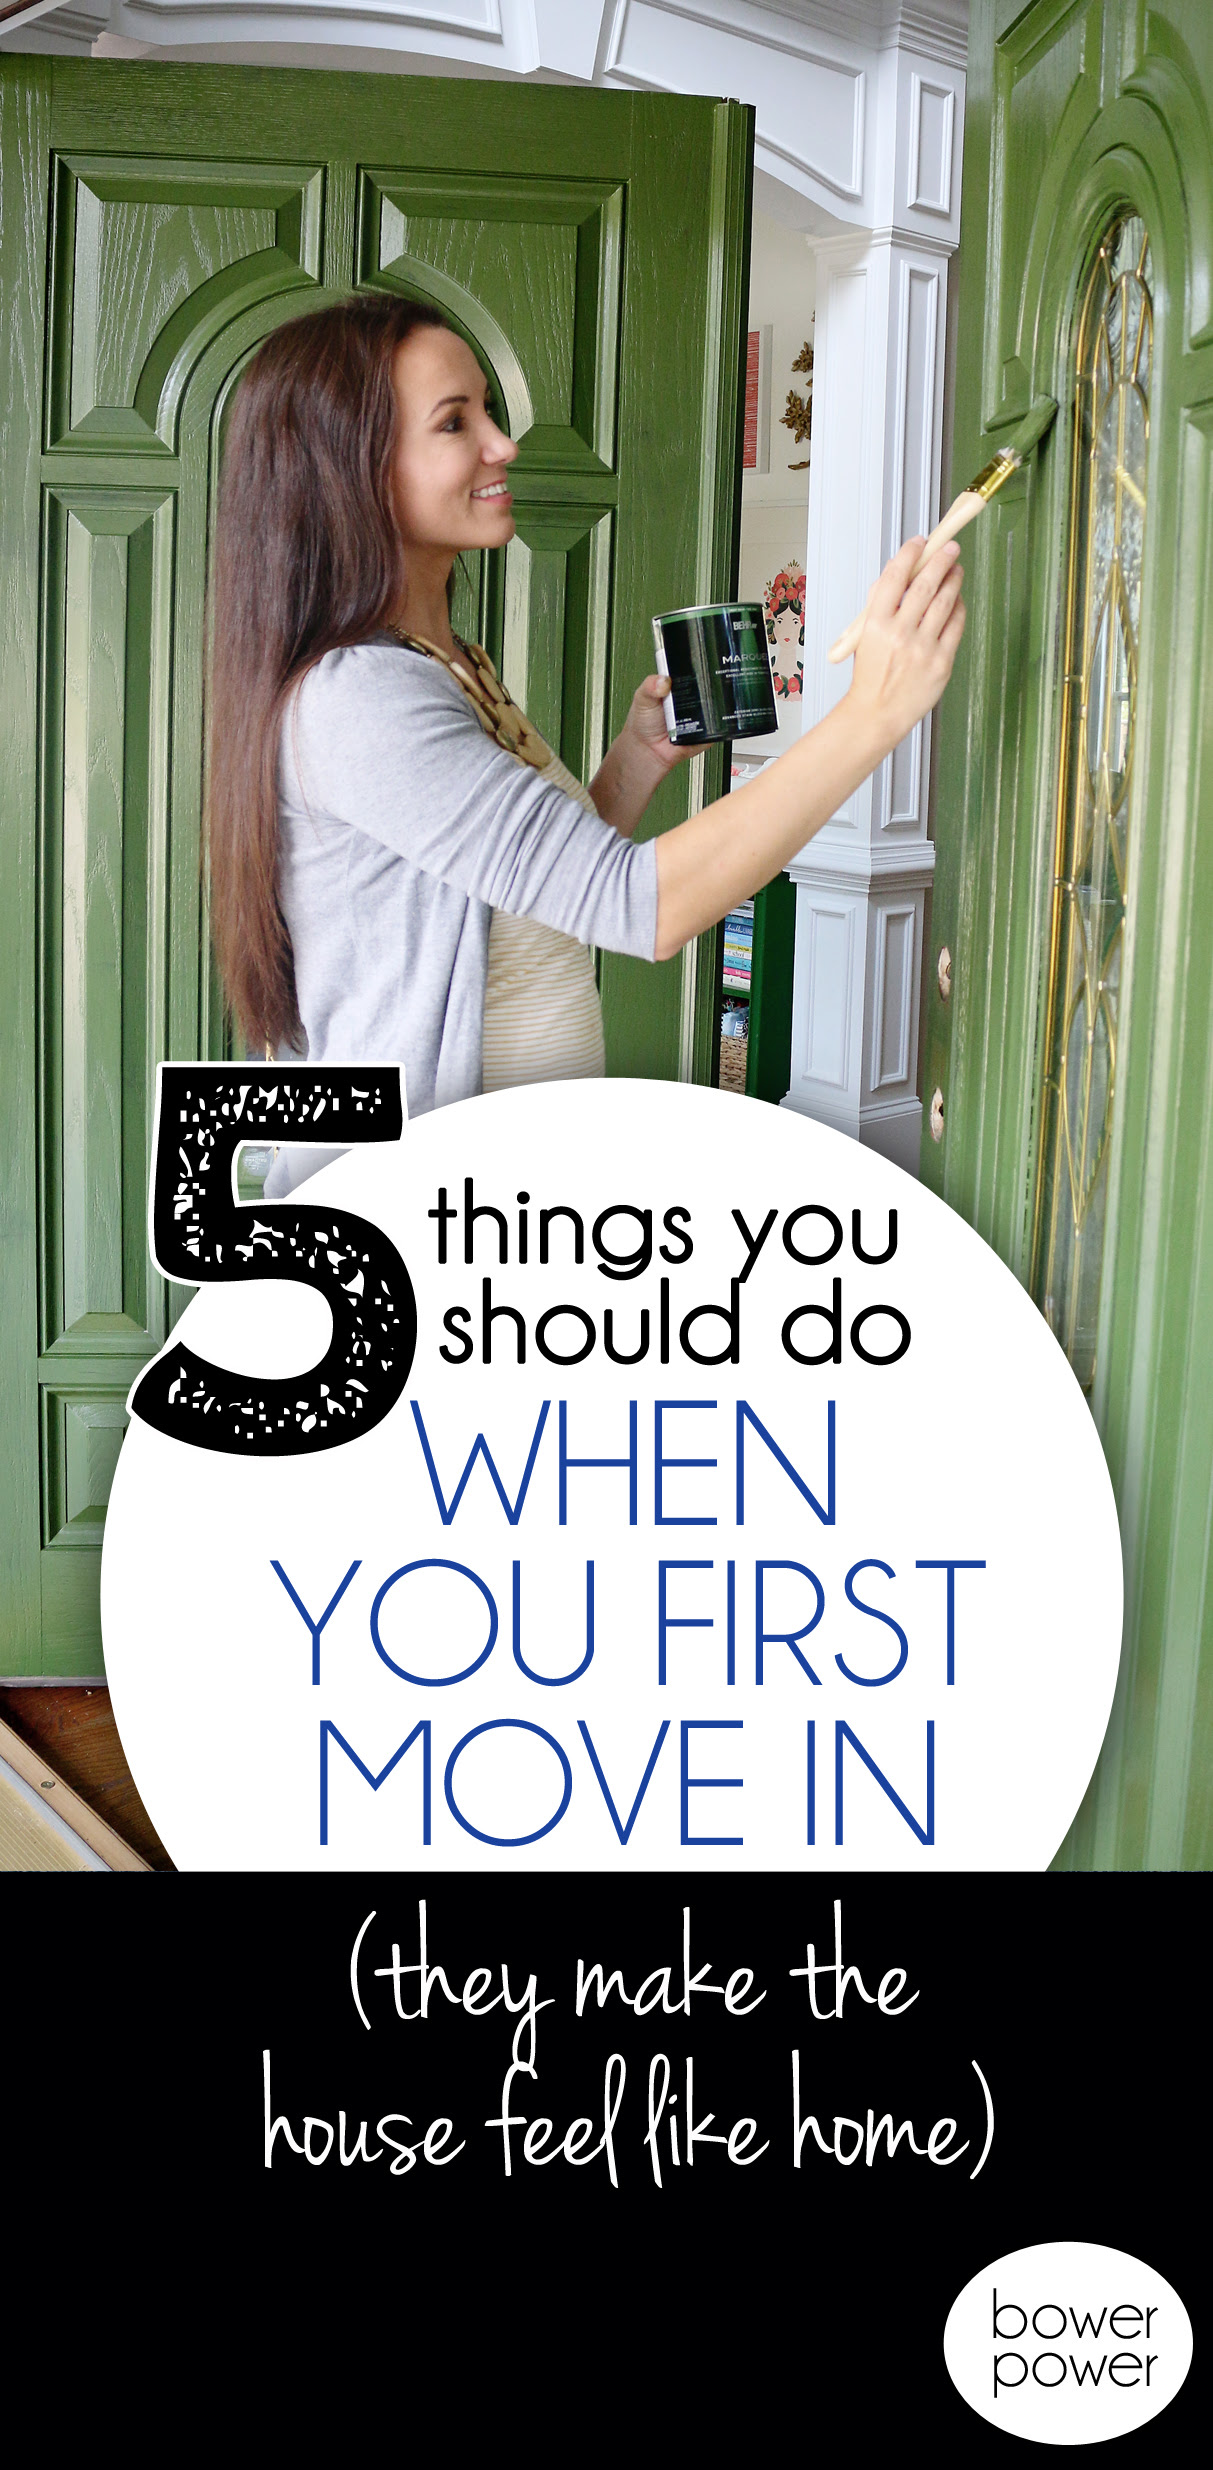 Five Things to do when moving into your dream home - Bower Power